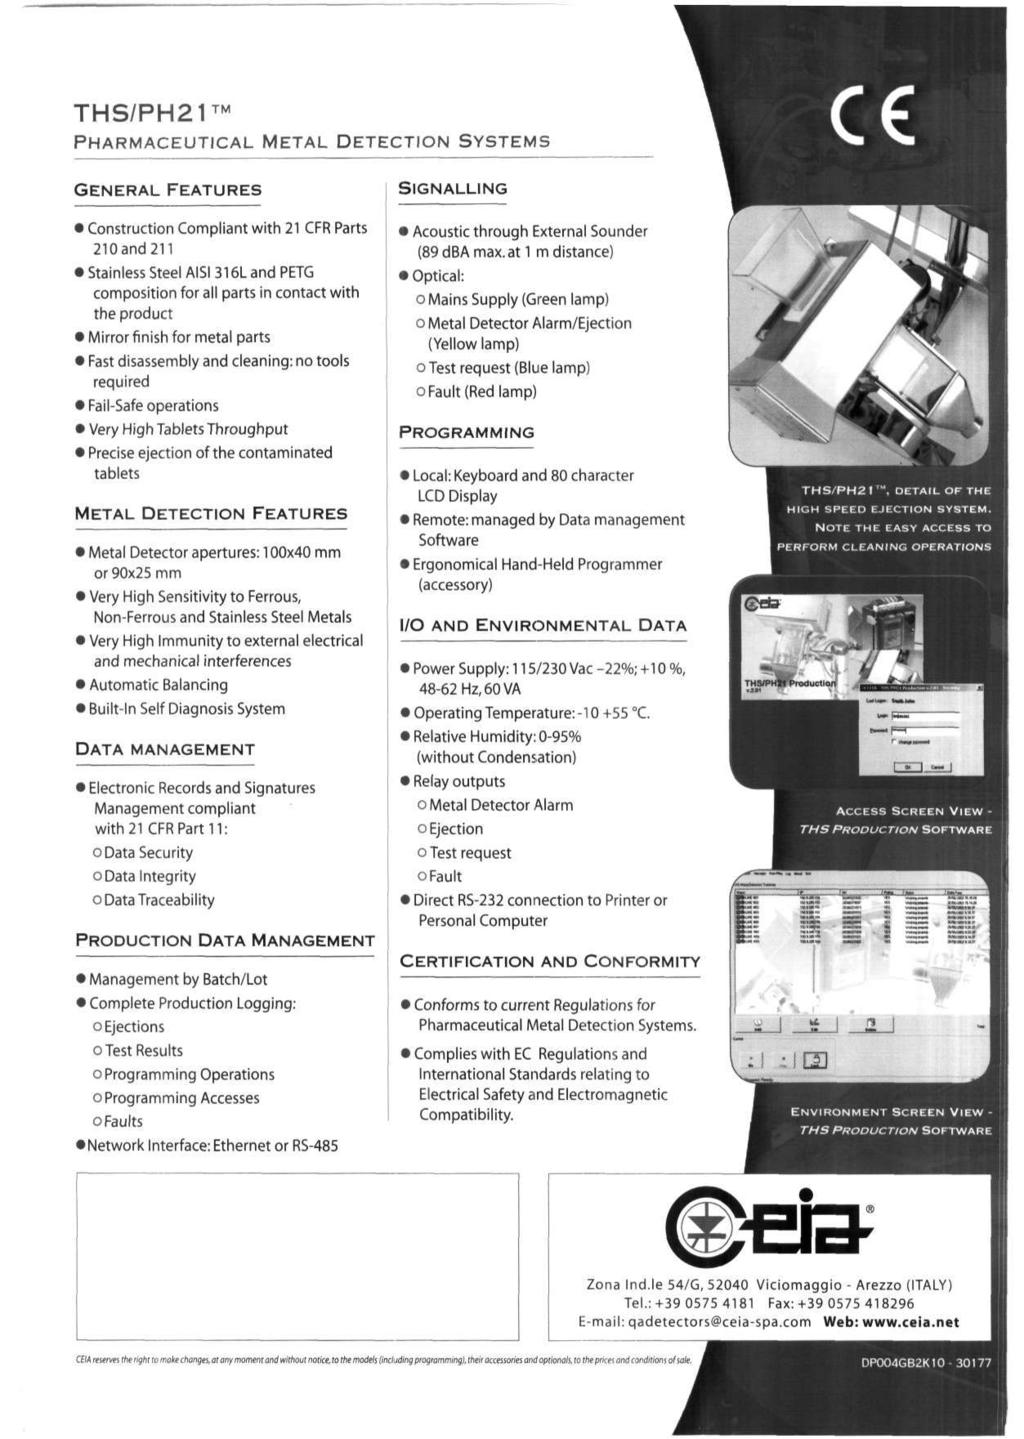 THS/PH21 PHARMACEUTICAL METAL DETECTION SYSTEMS GENERAL FEATURES SIGNALLING Construction Compliant with 21 CFR Parts 210and211 Stainless Steel AISI 316L and PETG composition for all parts in contact